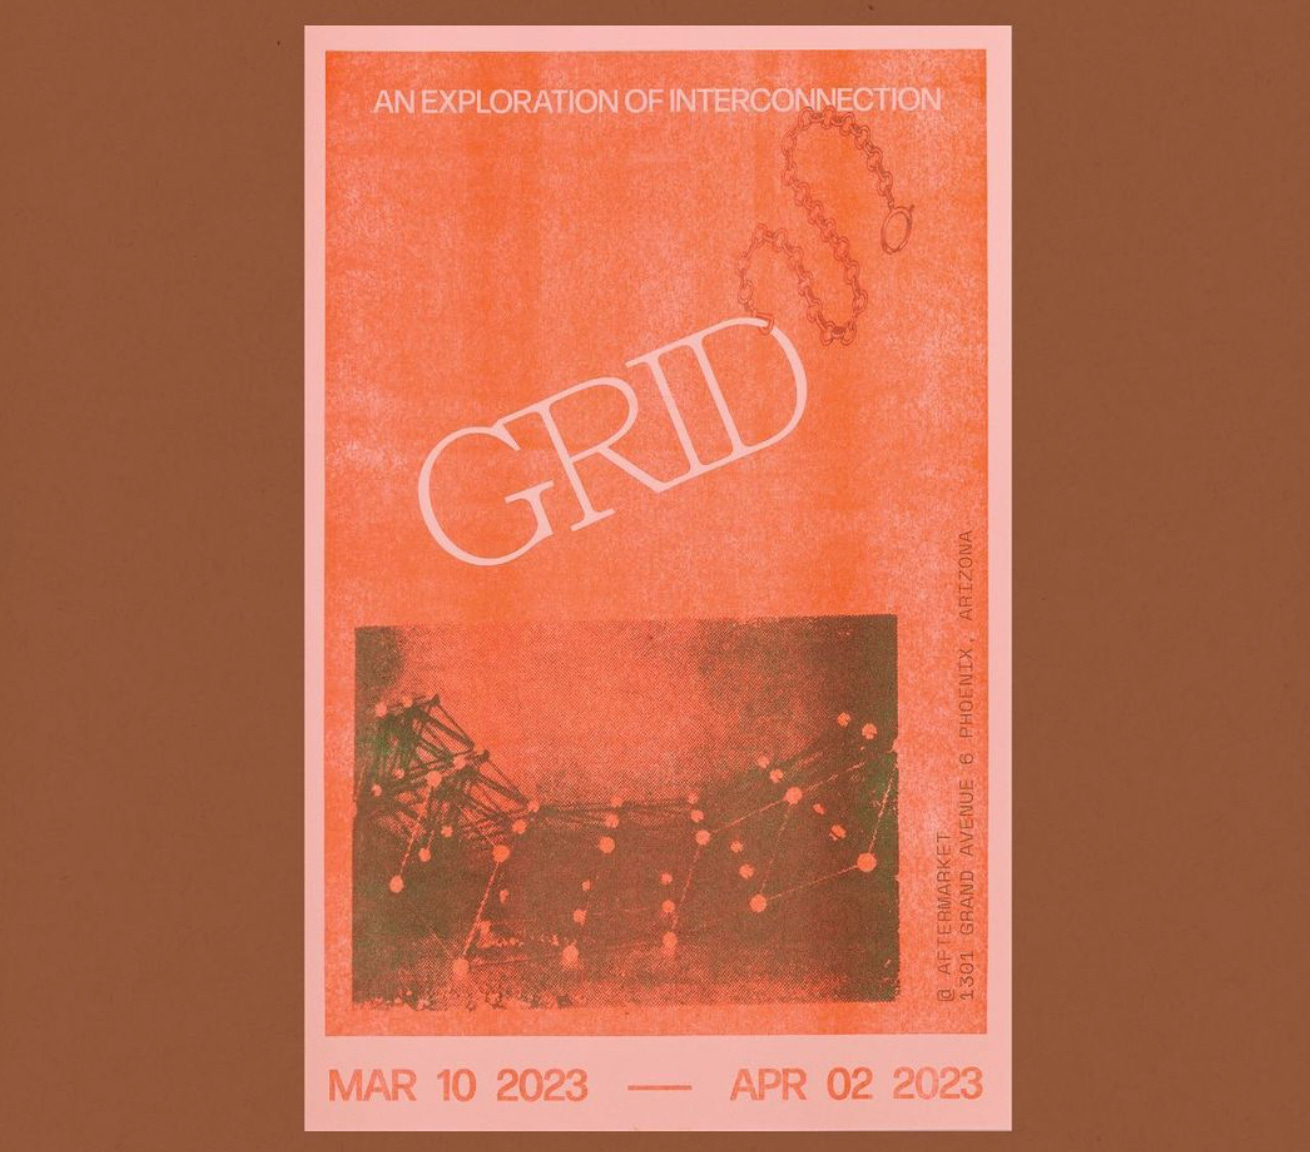 a poster announcing the new boutique GRID is opening at aftermarket in phoenix from march 10 - April 2 2023